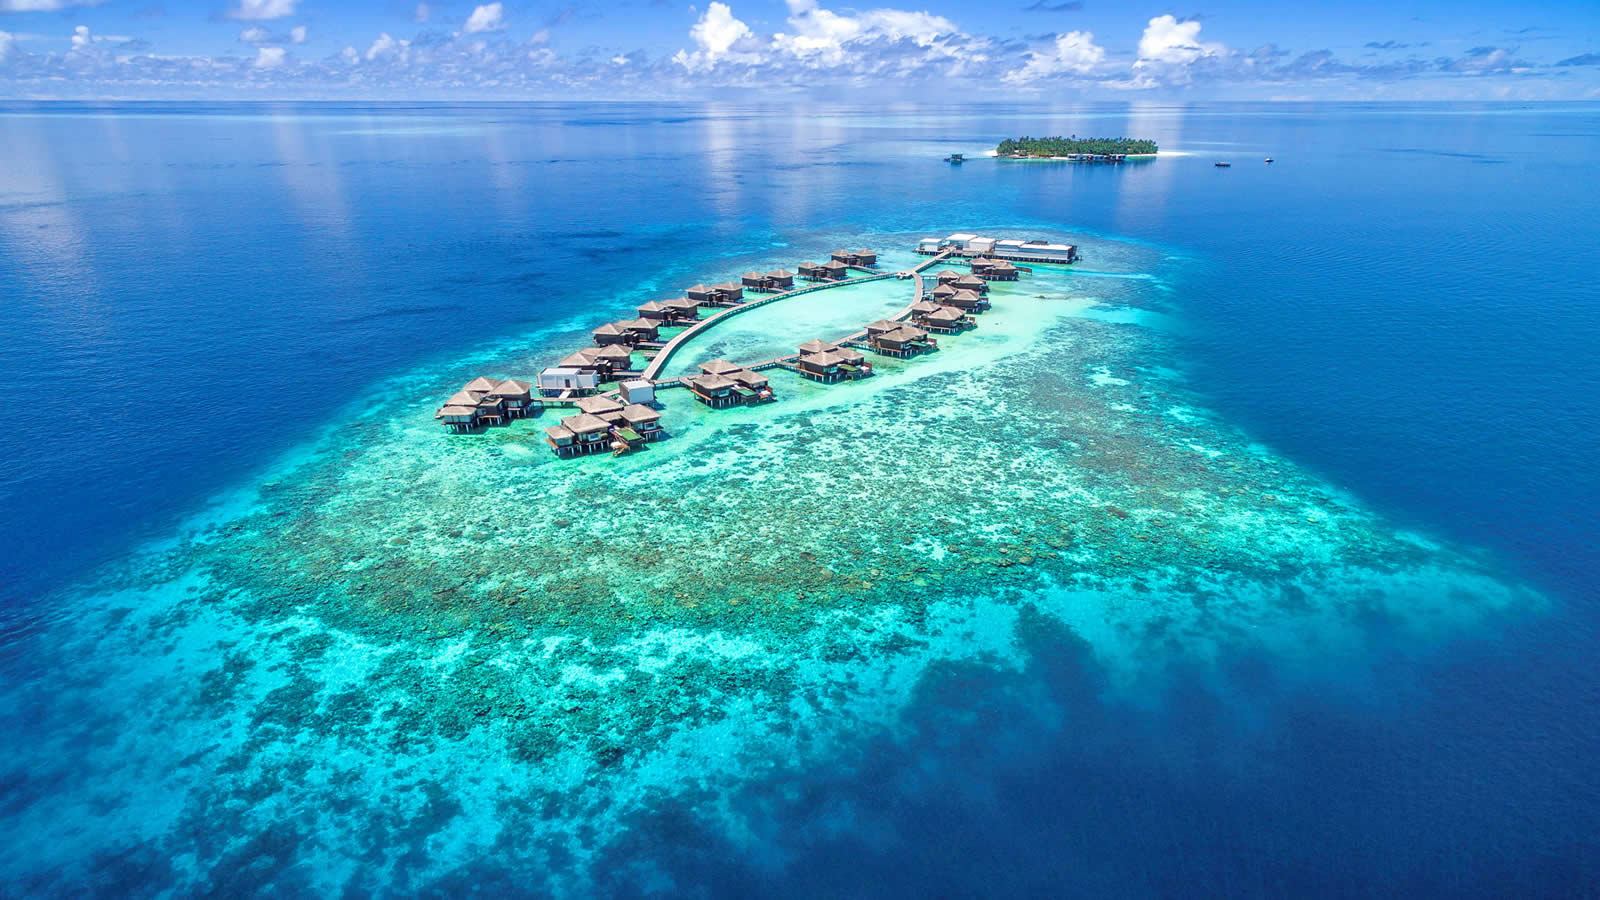 Accor Hotels in The Maldives